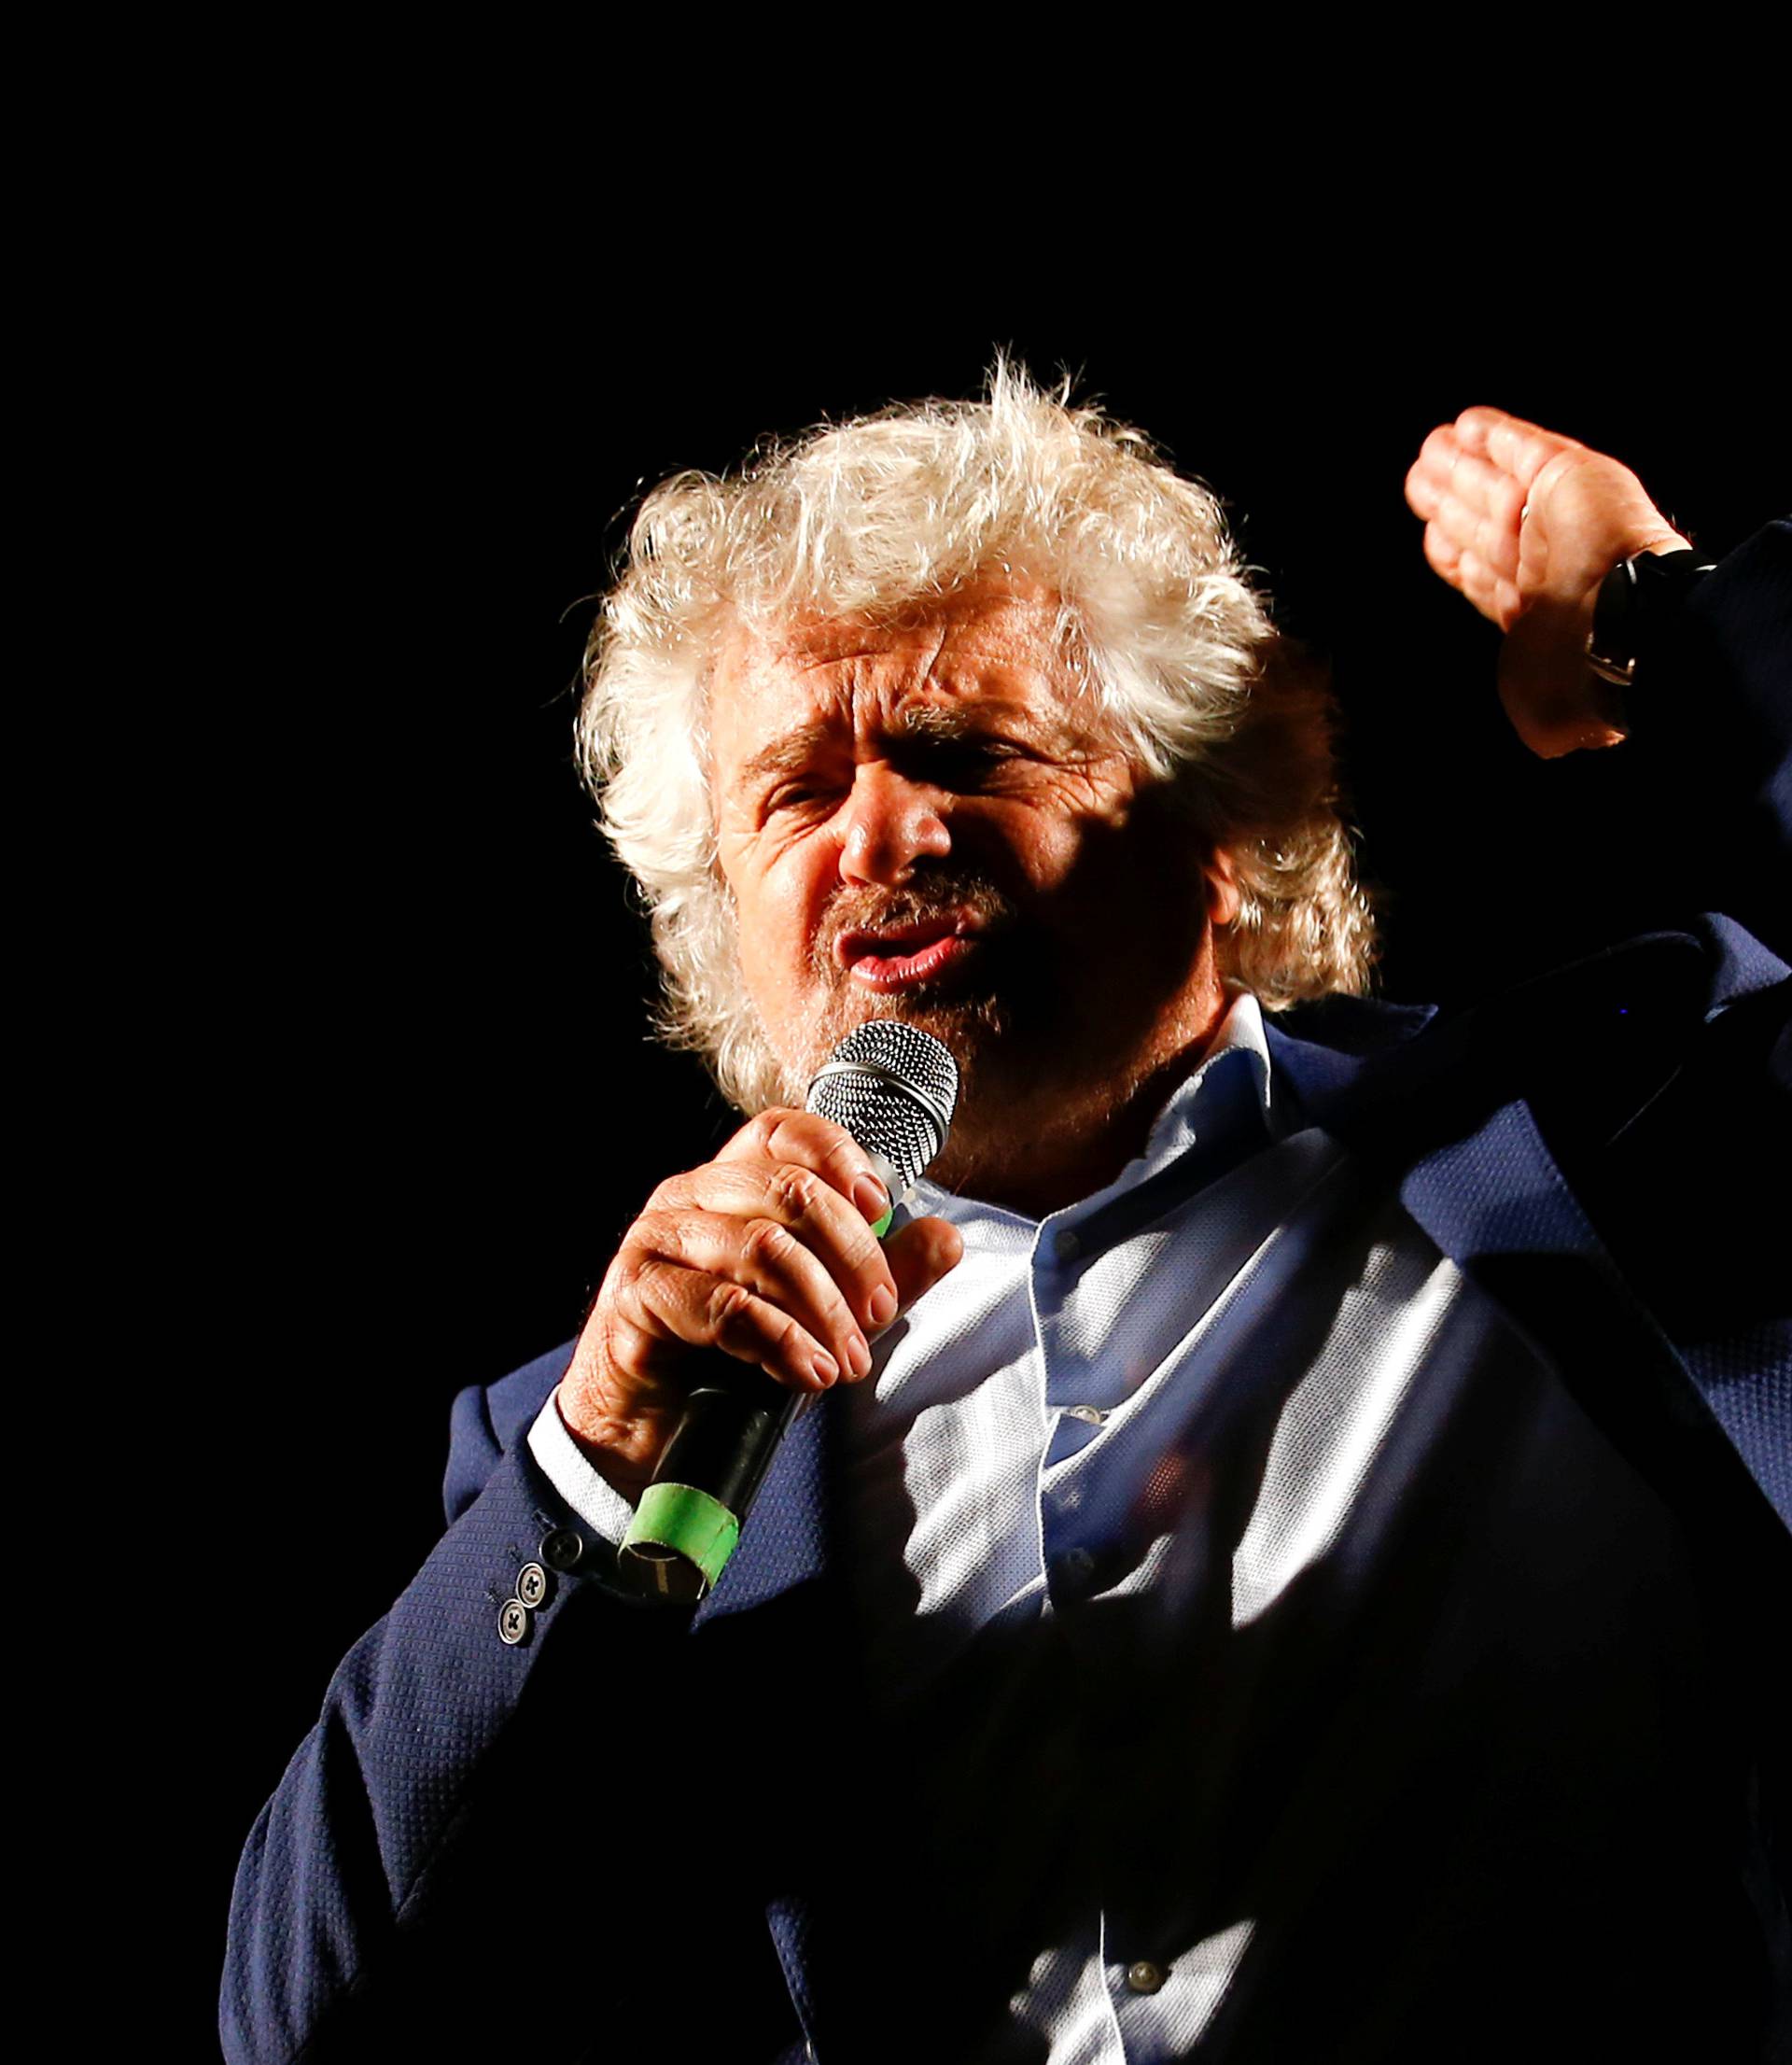 Beppe Grillo, the founder of the anti-establishment 5-Star Movement, talks during a march in support of the 'No' vote in the upcoming constitutional reform referendum in Rome